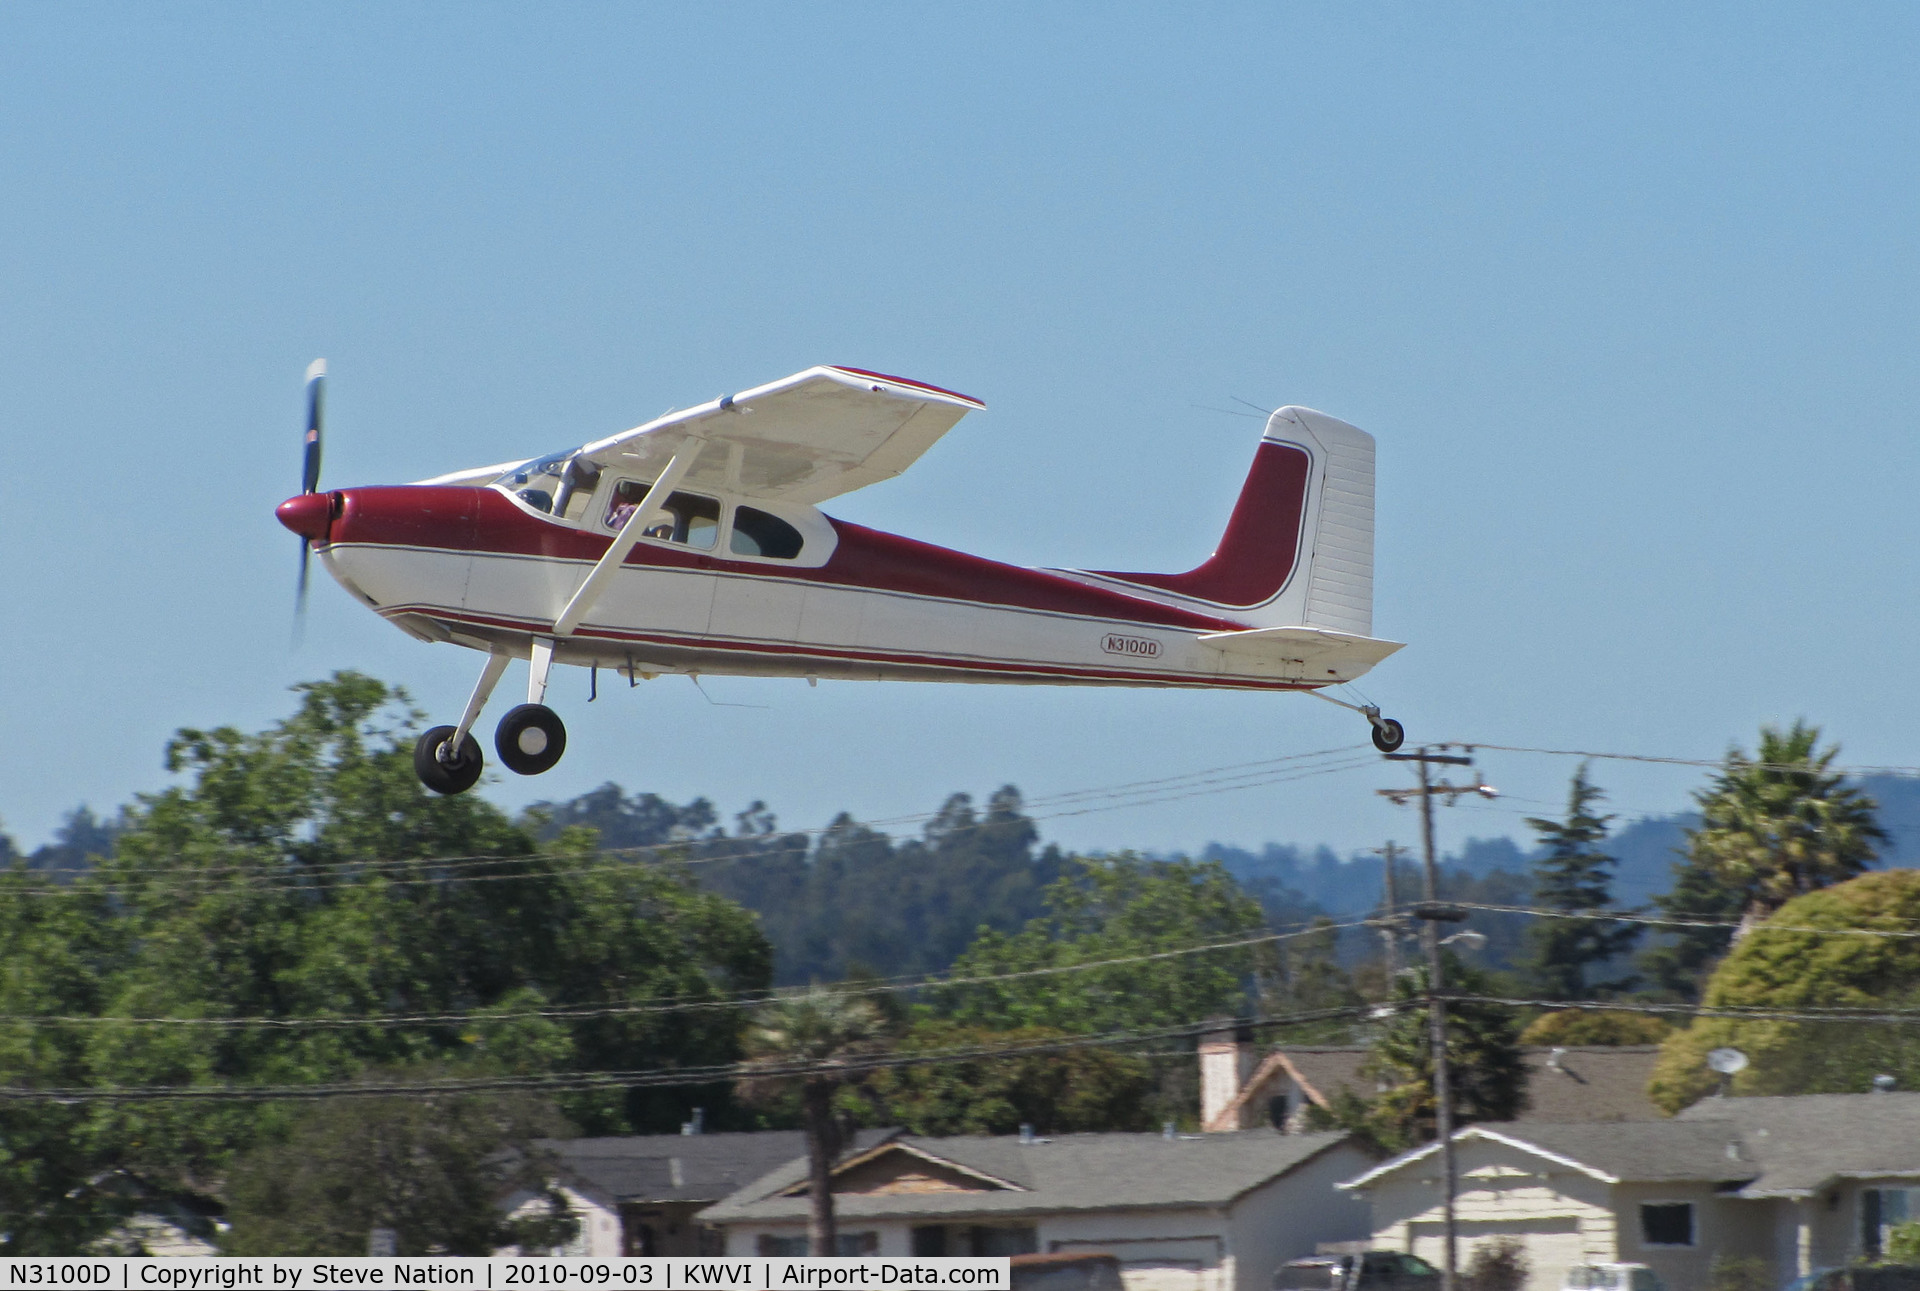 N3100D, 1955 Cessna 180 C/N 31898, San Jose, CA-based 1955 Cessna 180 climbing out @ 2010 Watsonville Fly-In